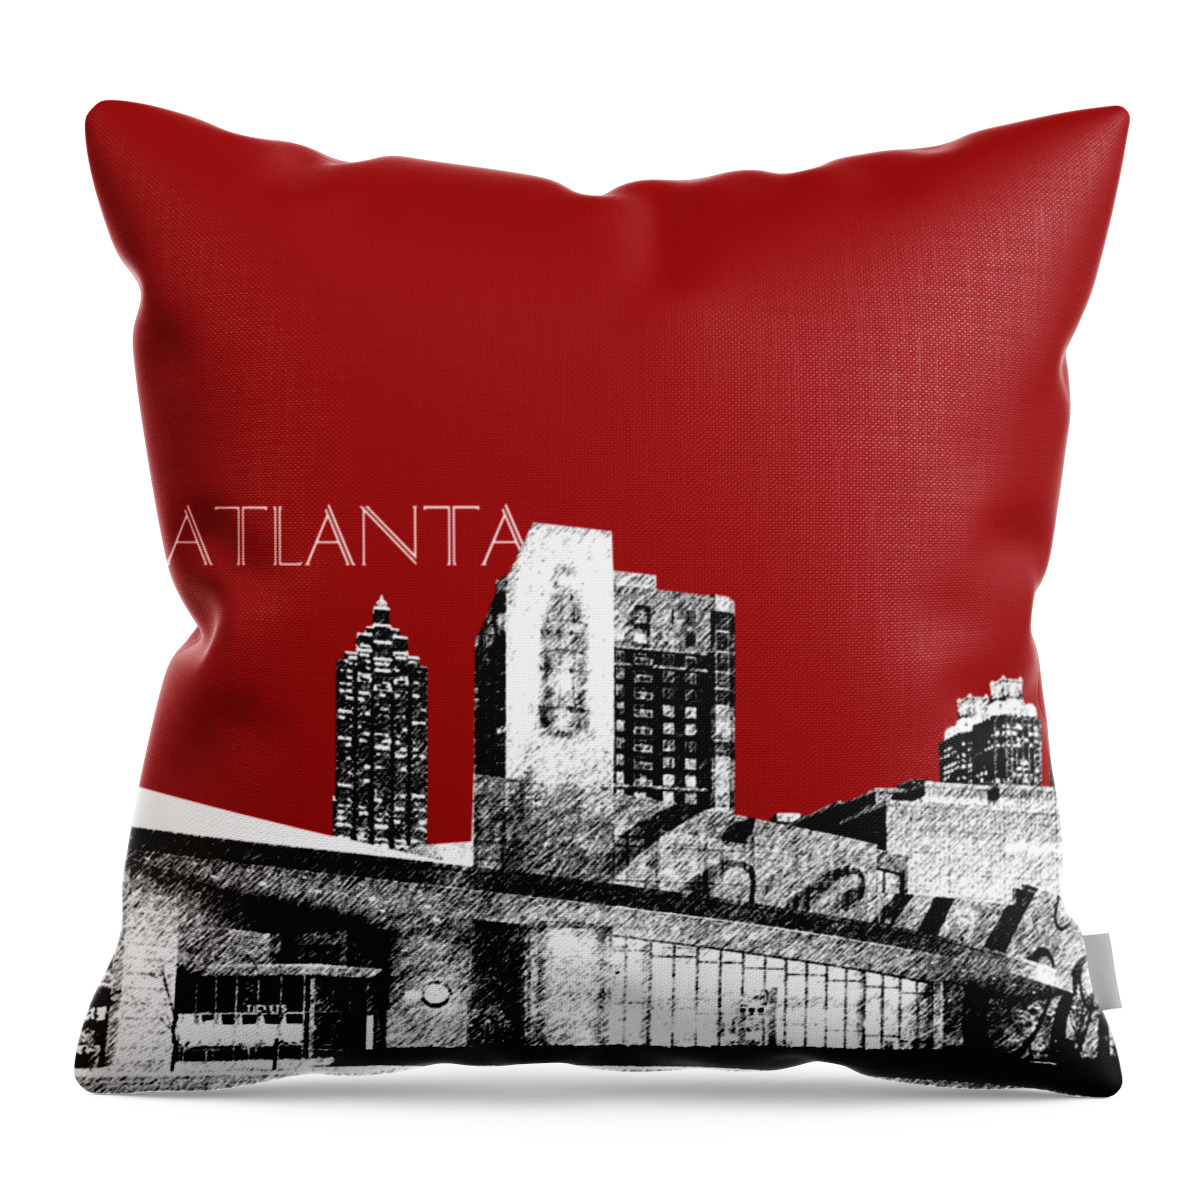 Architecture Throw Pillow featuring the digital art Atlanta World of Coke Museum - Dark Red by DB Artist